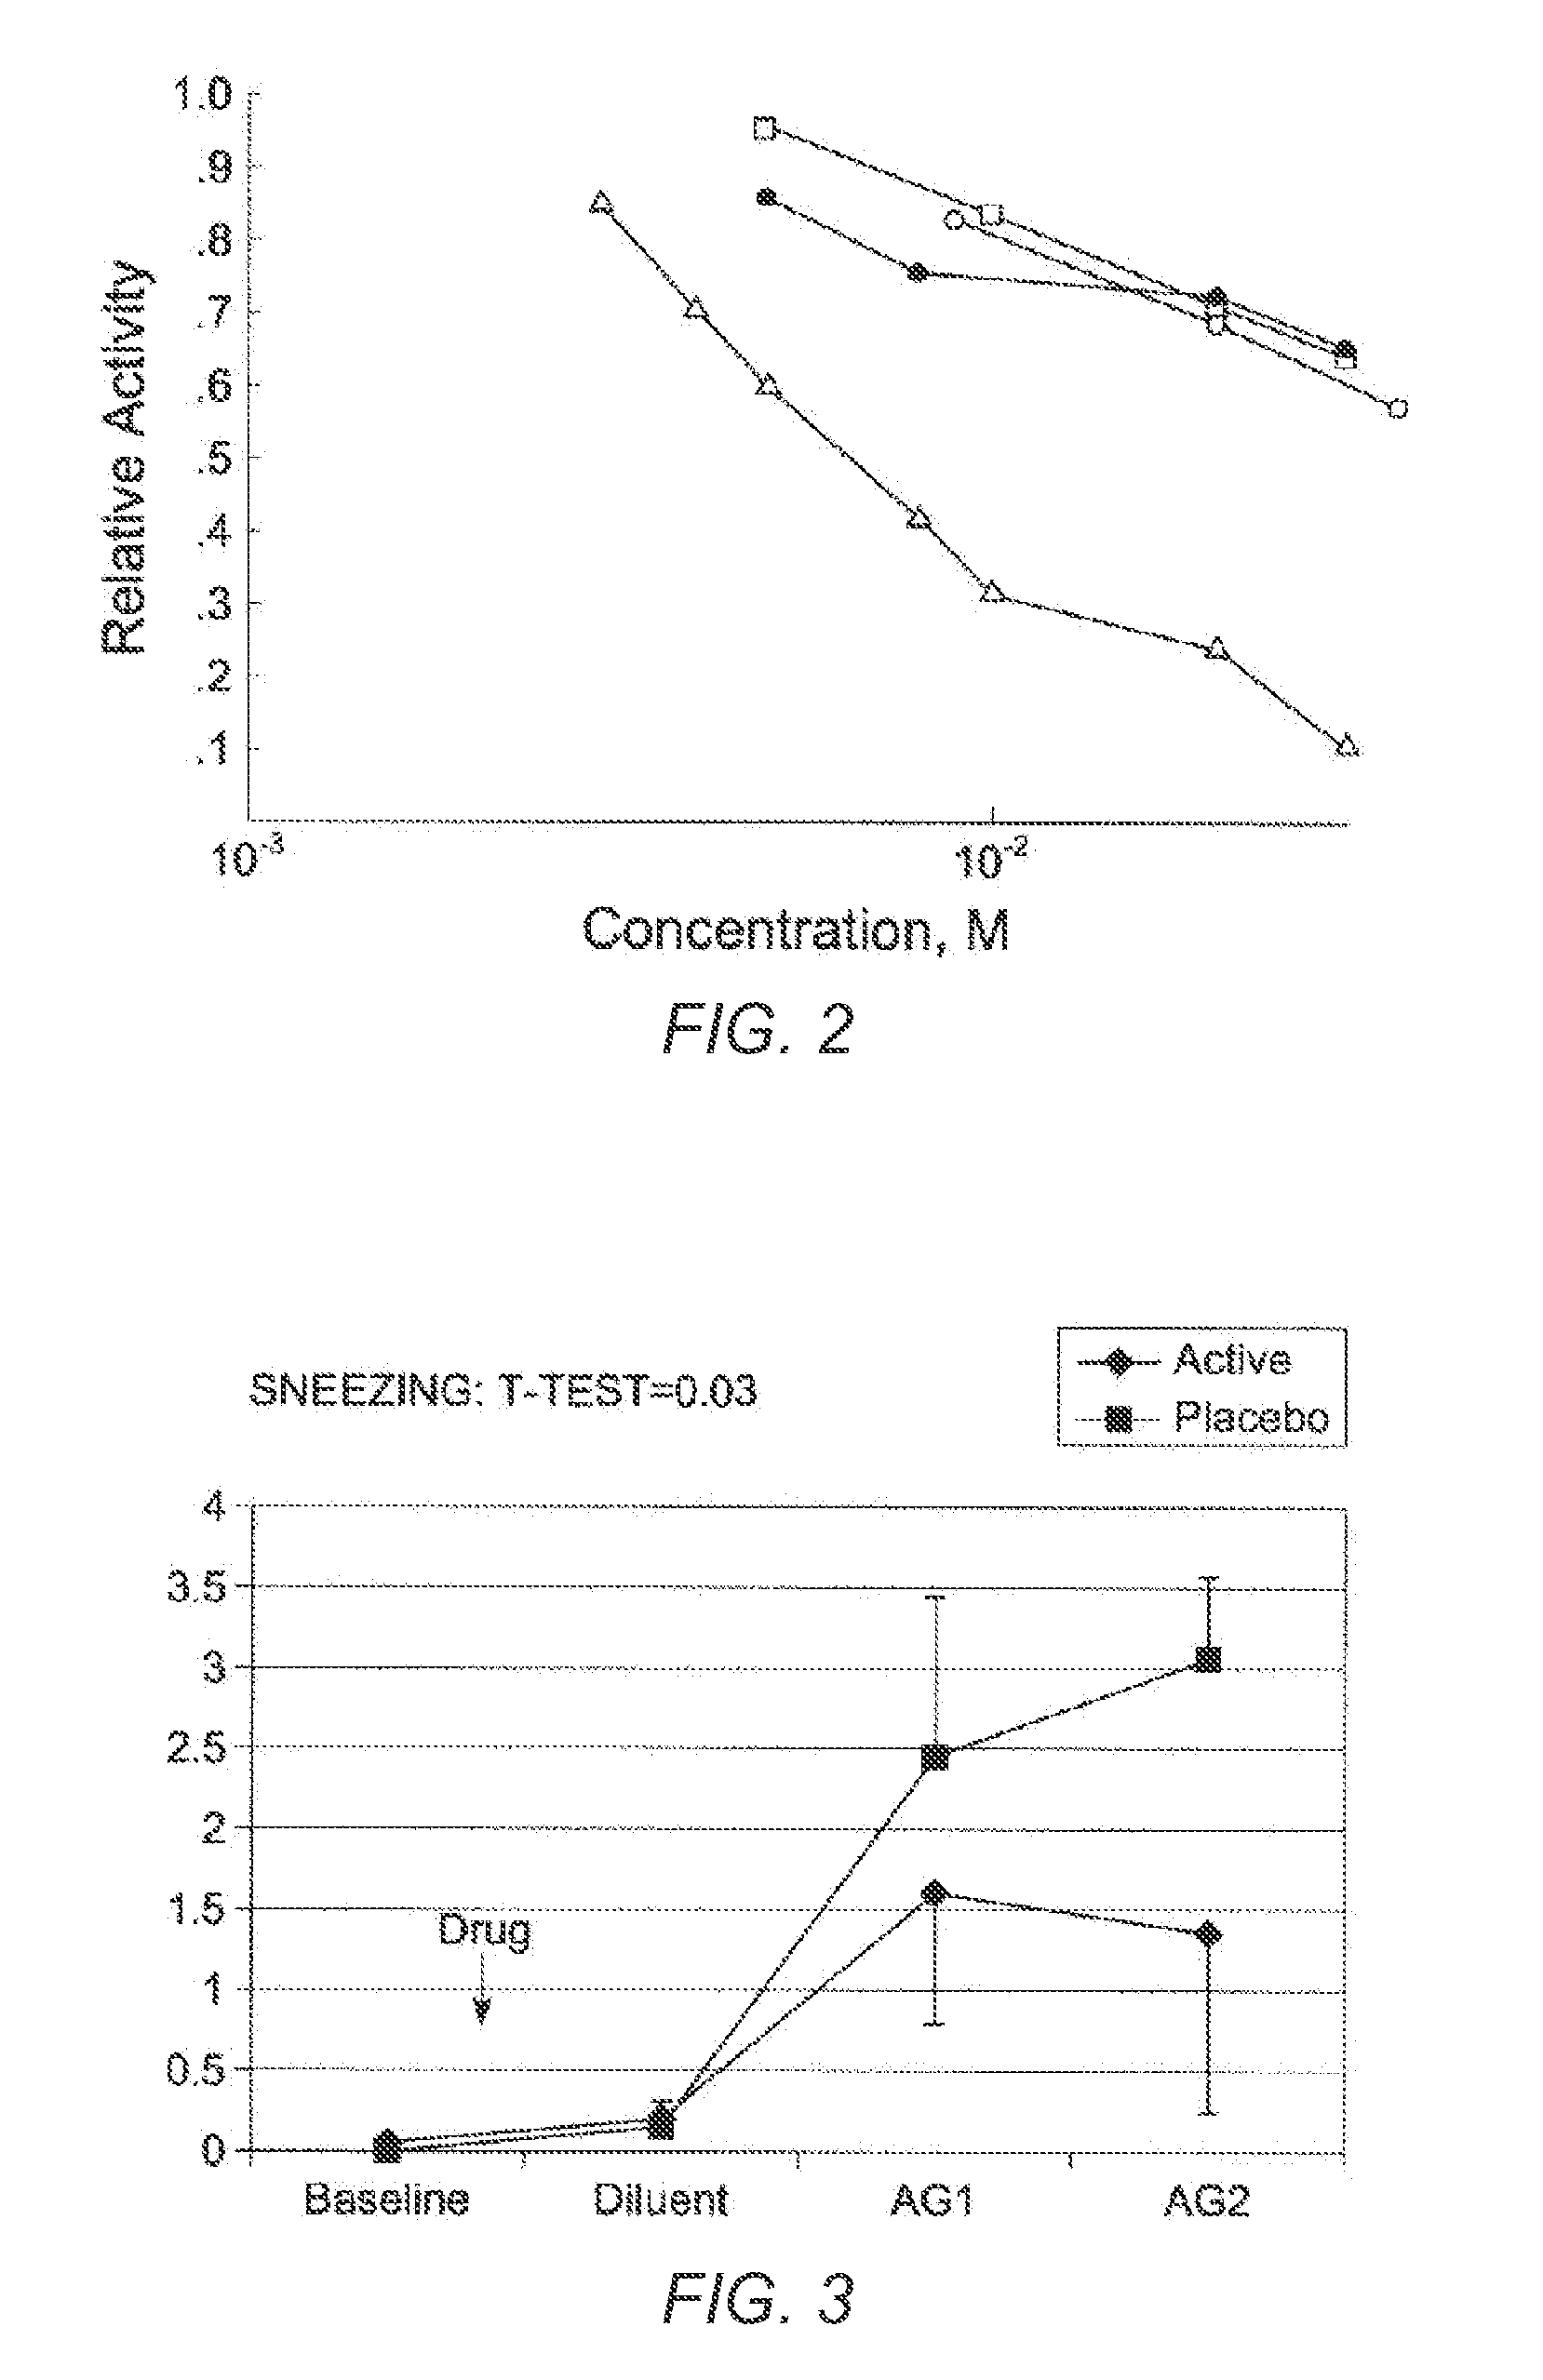 X-ray contrast media compositions and methods of using the same to treat, reduce or delay the onset of CNS inflammation and inflammation associated conditions